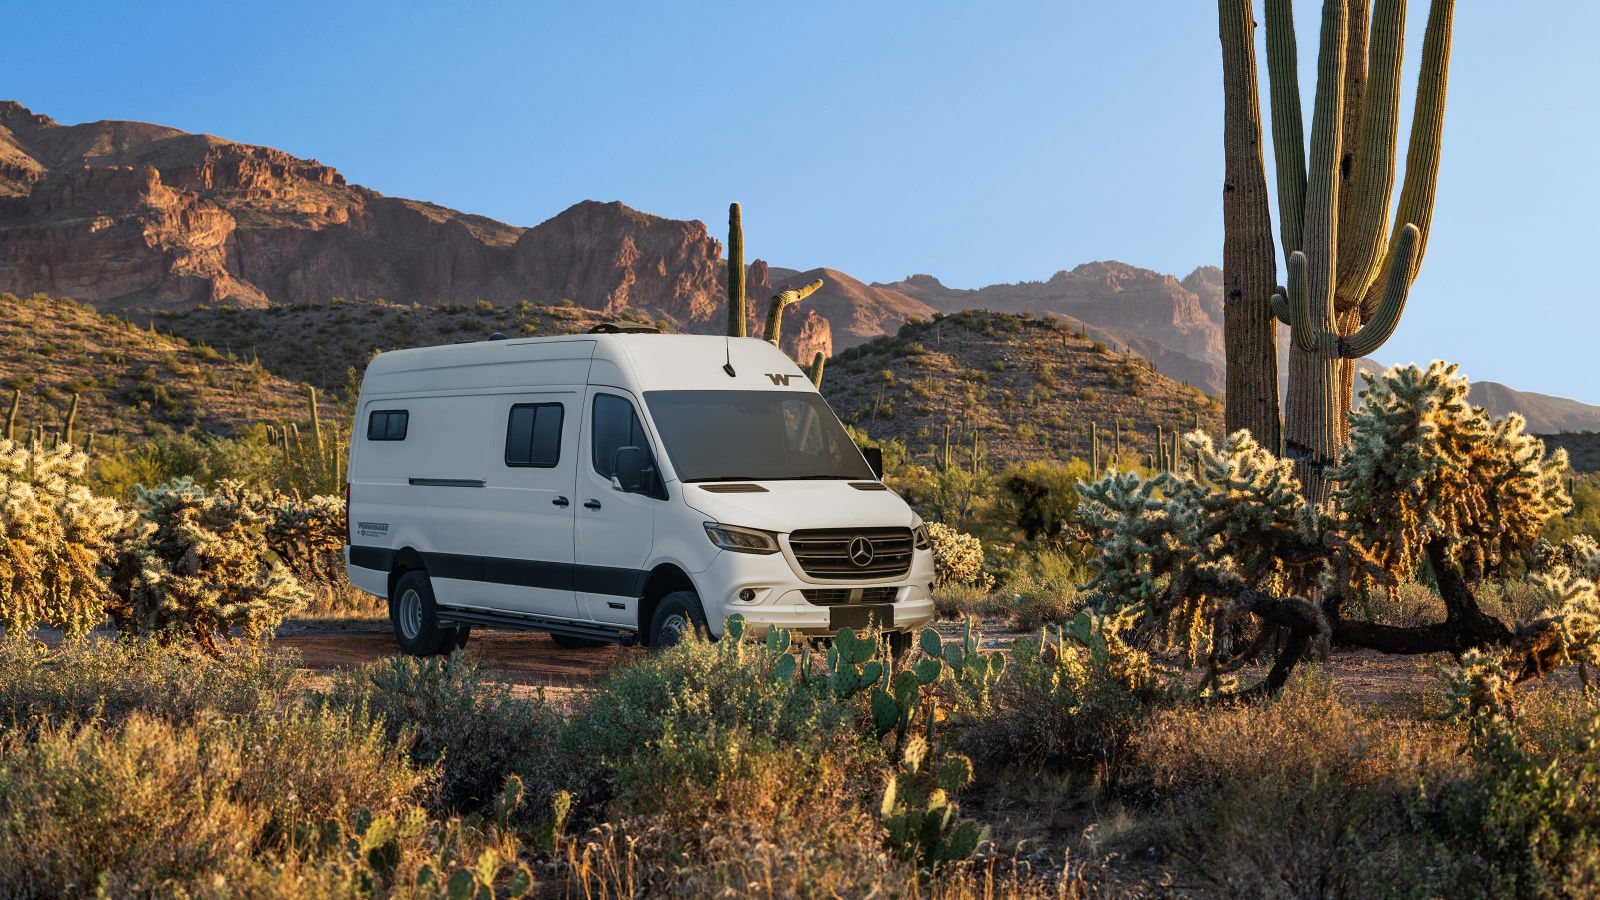 The Winnebago Adventure Wagon in a desert setting, surrounded by cacti and mountains